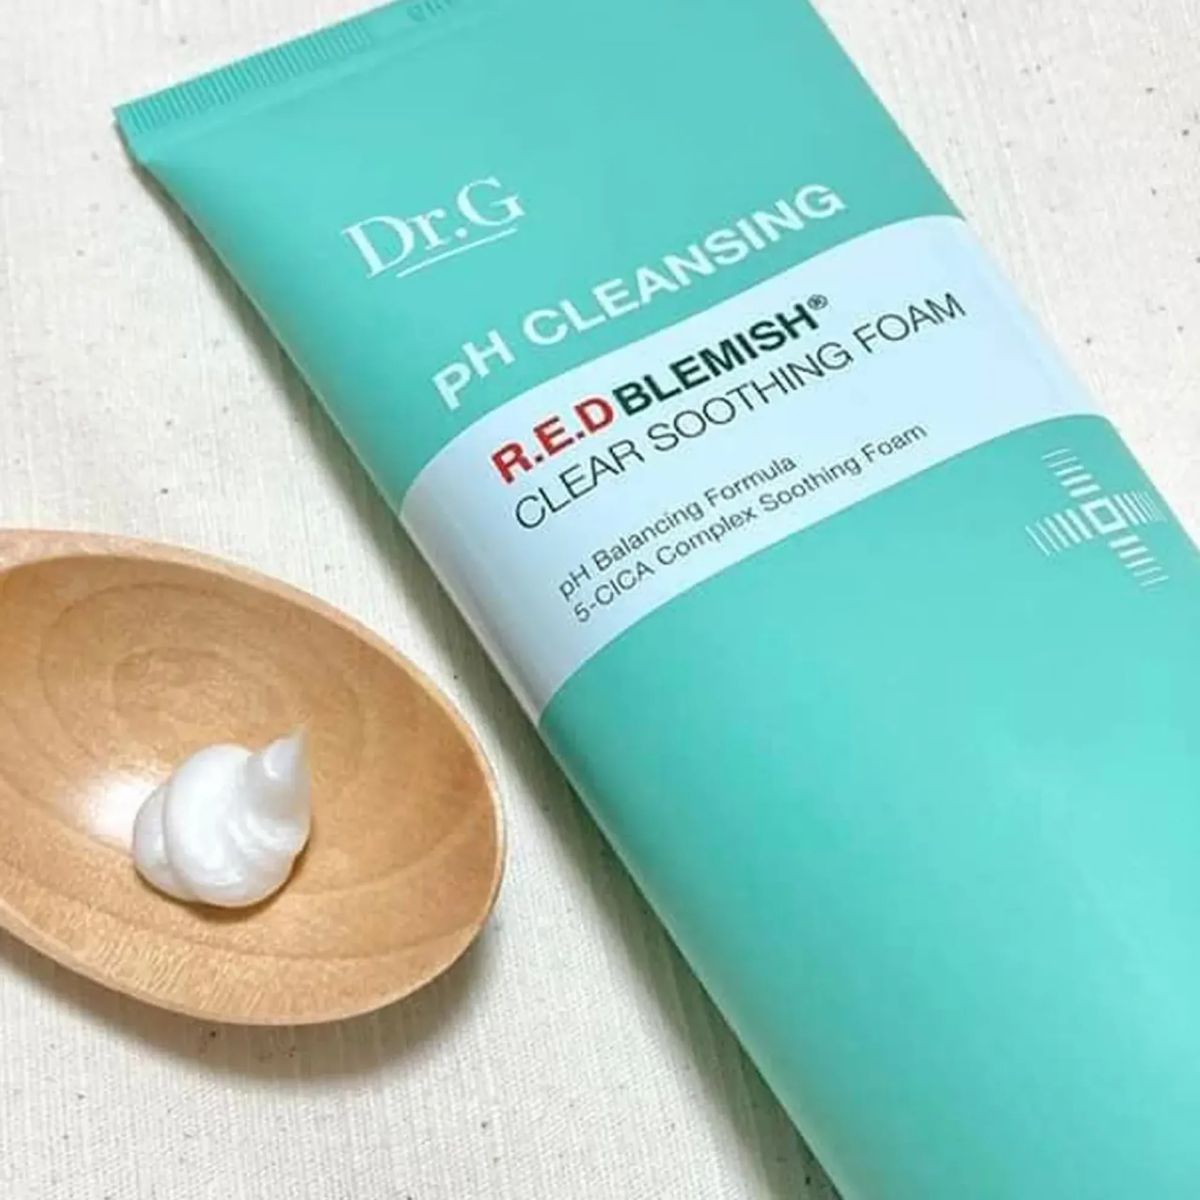 Sữa rửa mặt Dr.G pH Cleansing R.E.D Blemish Clear Soothing 30ml